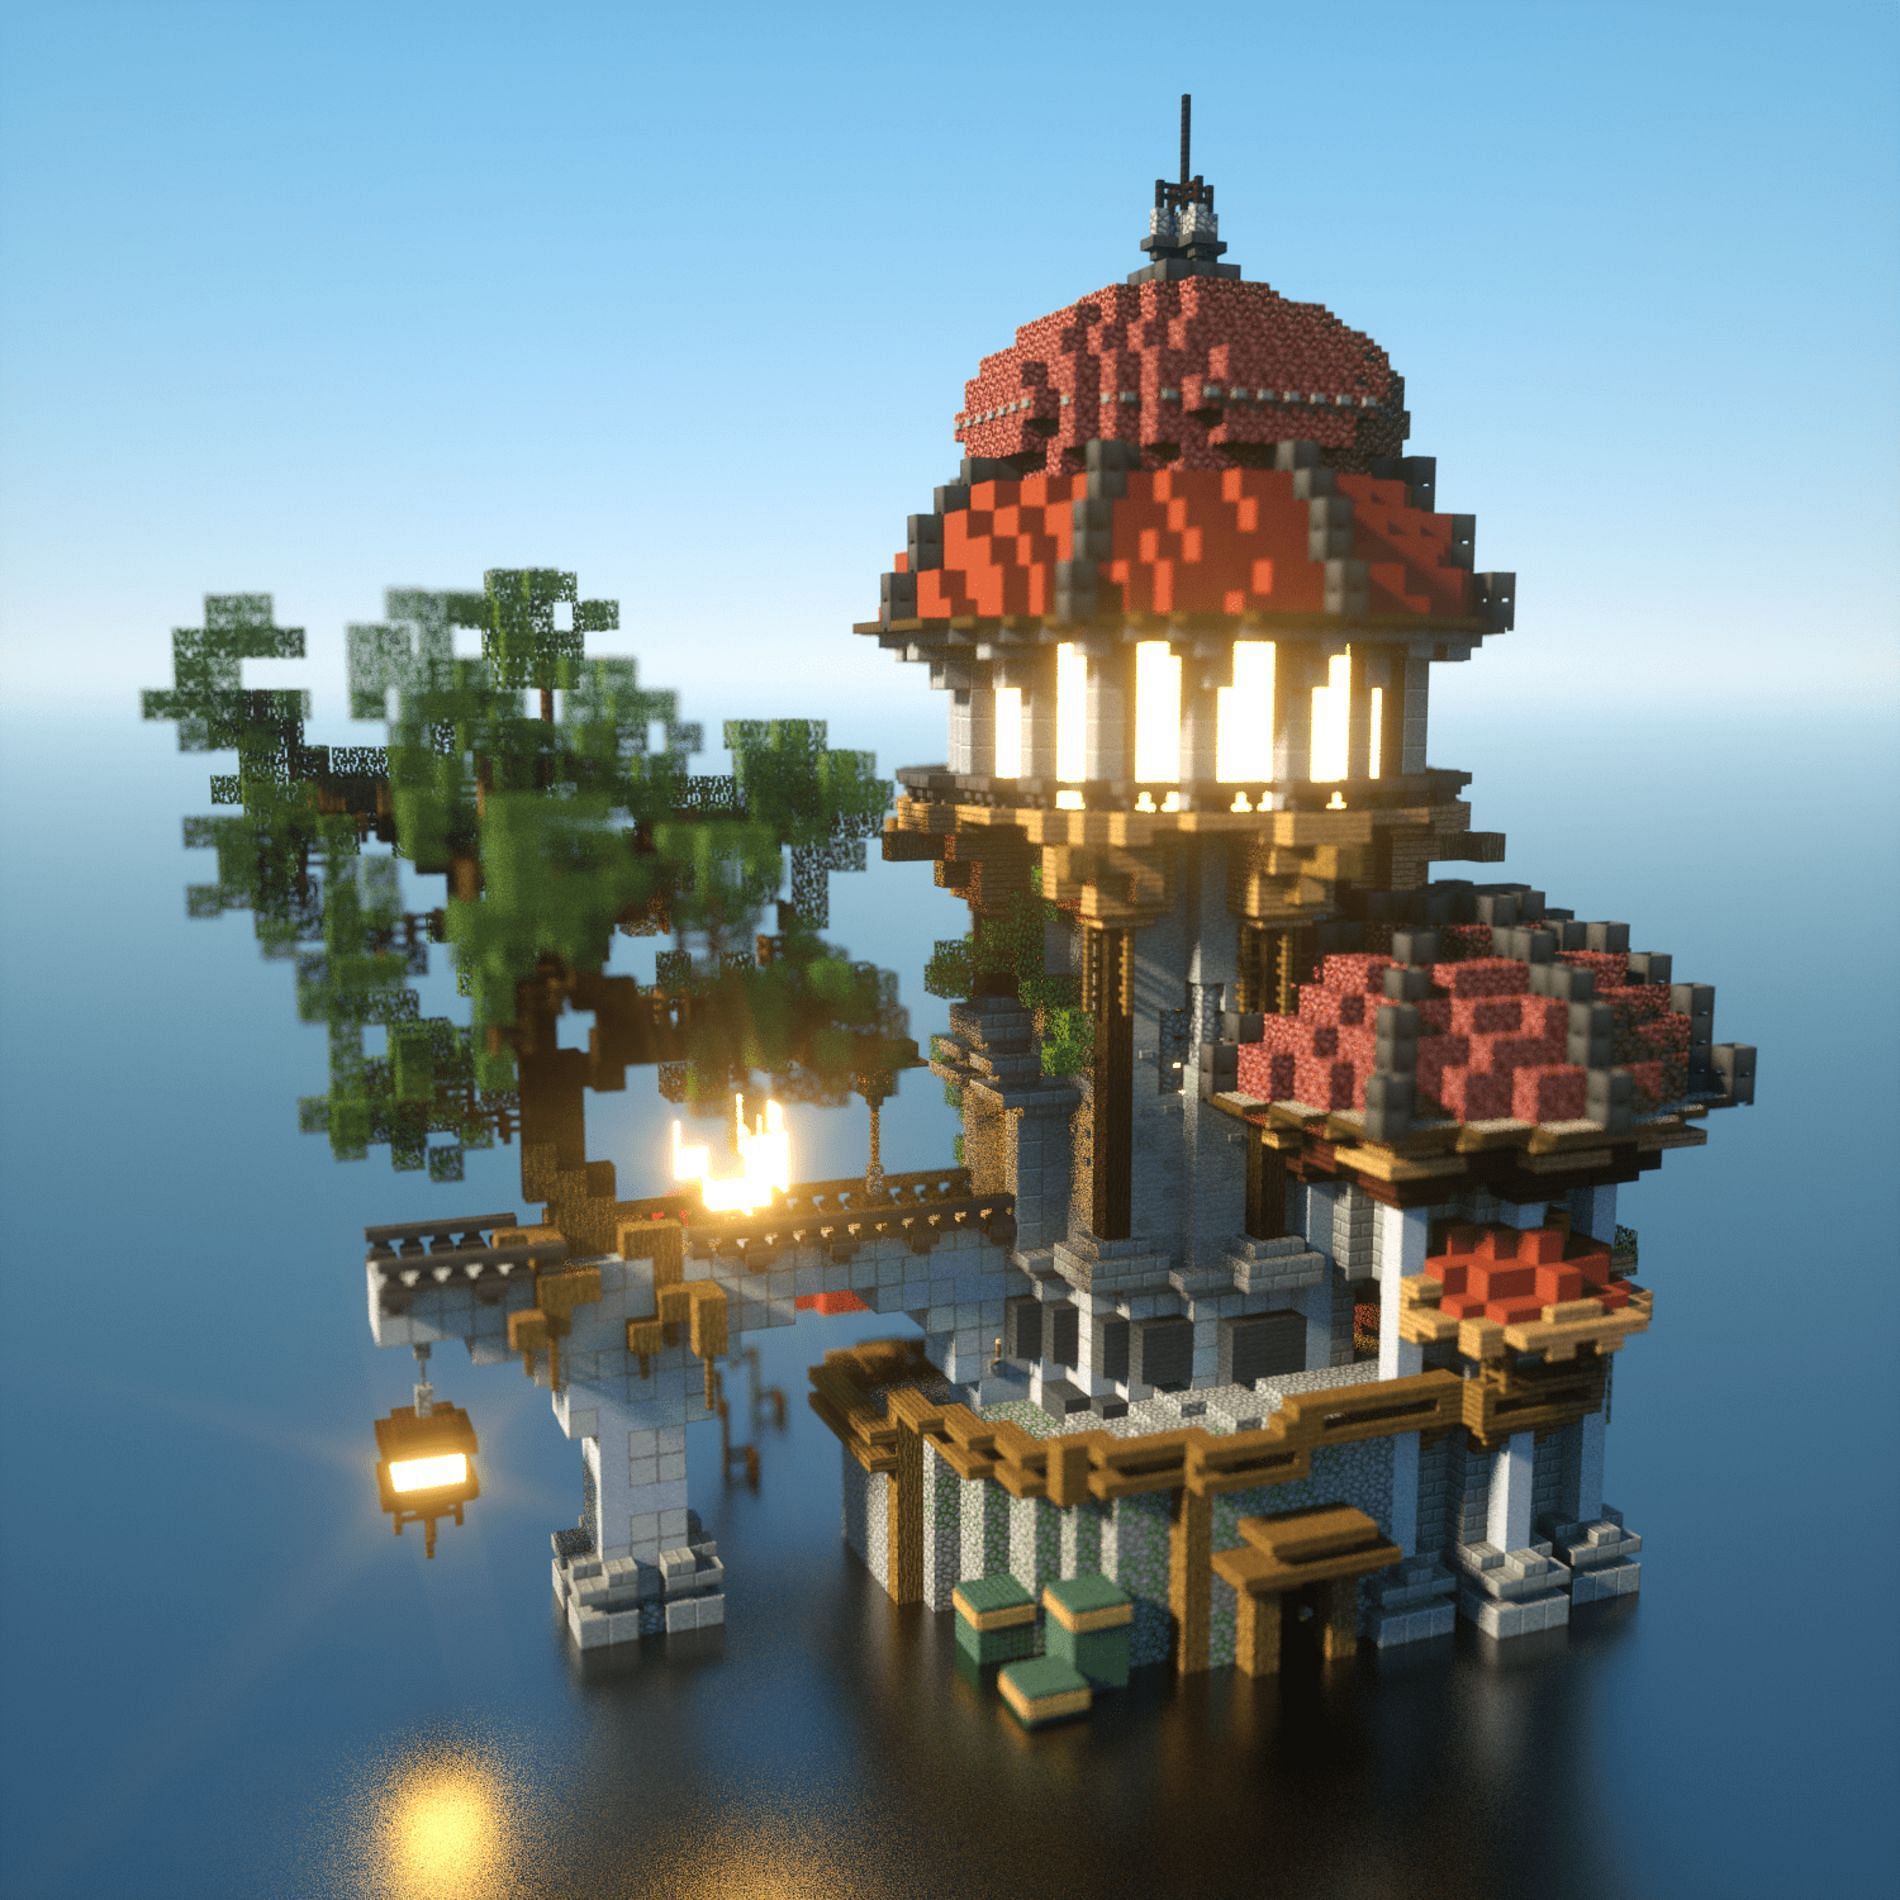 A wizard tower with a more rounded roof concept (Image via Mojang Studios)